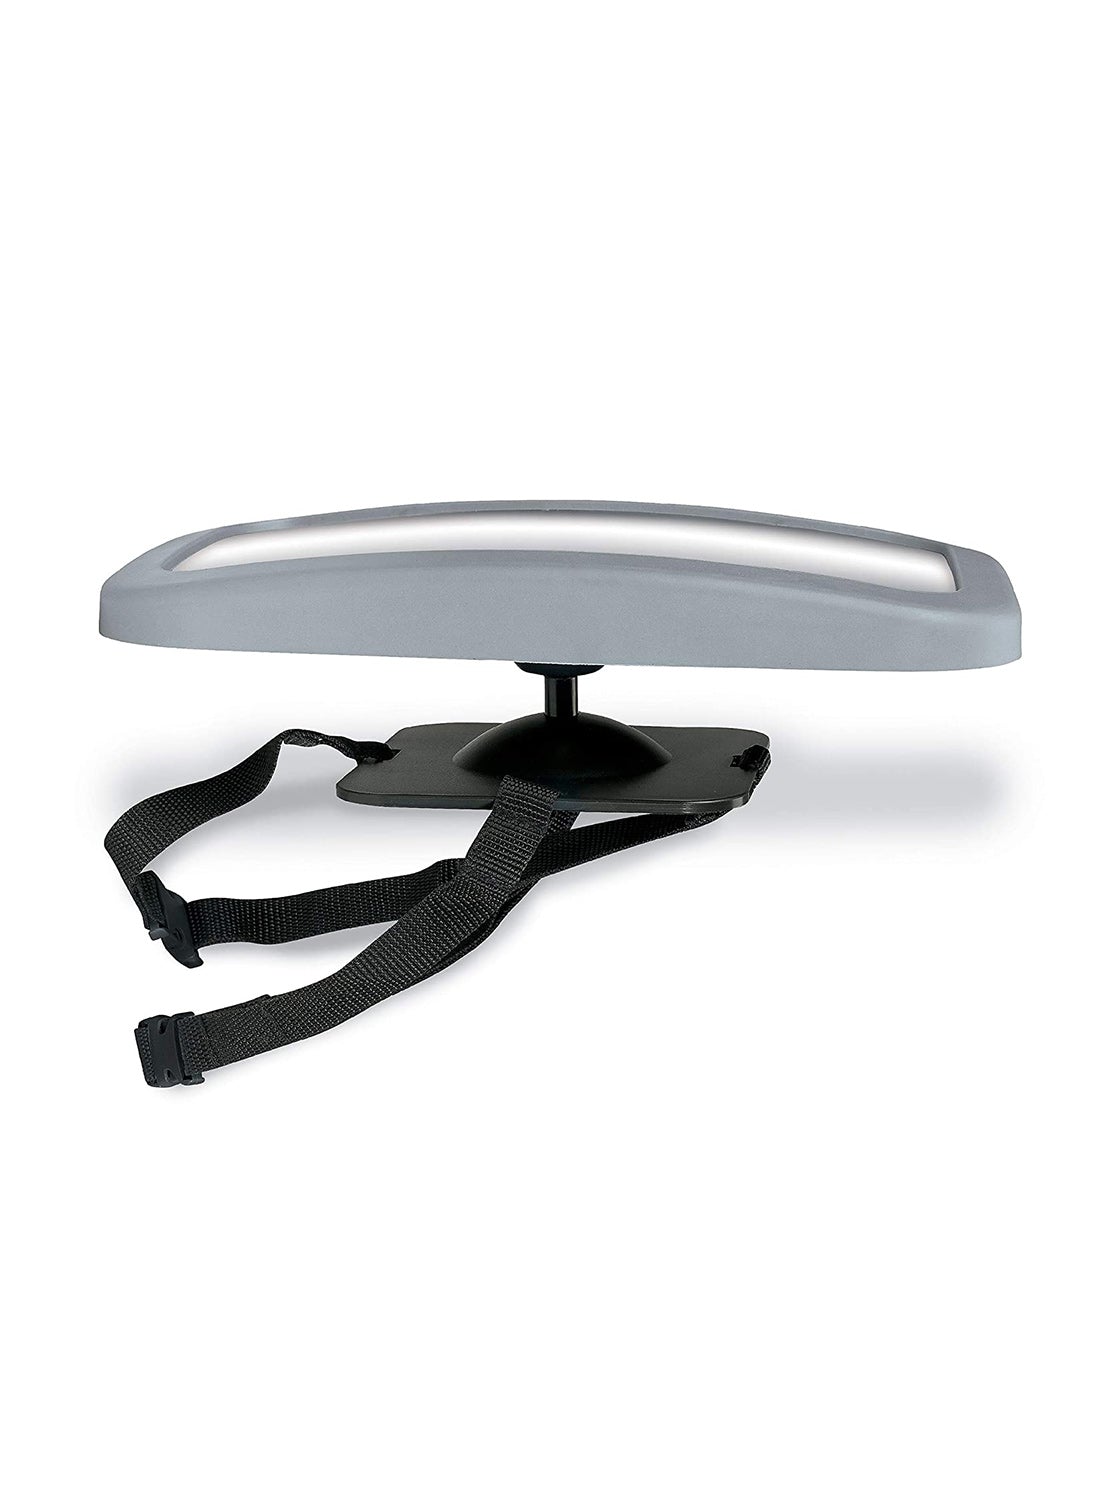 Britax Baby Car Mirror for Back Seat, XL - ANB Baby -$20 - $50